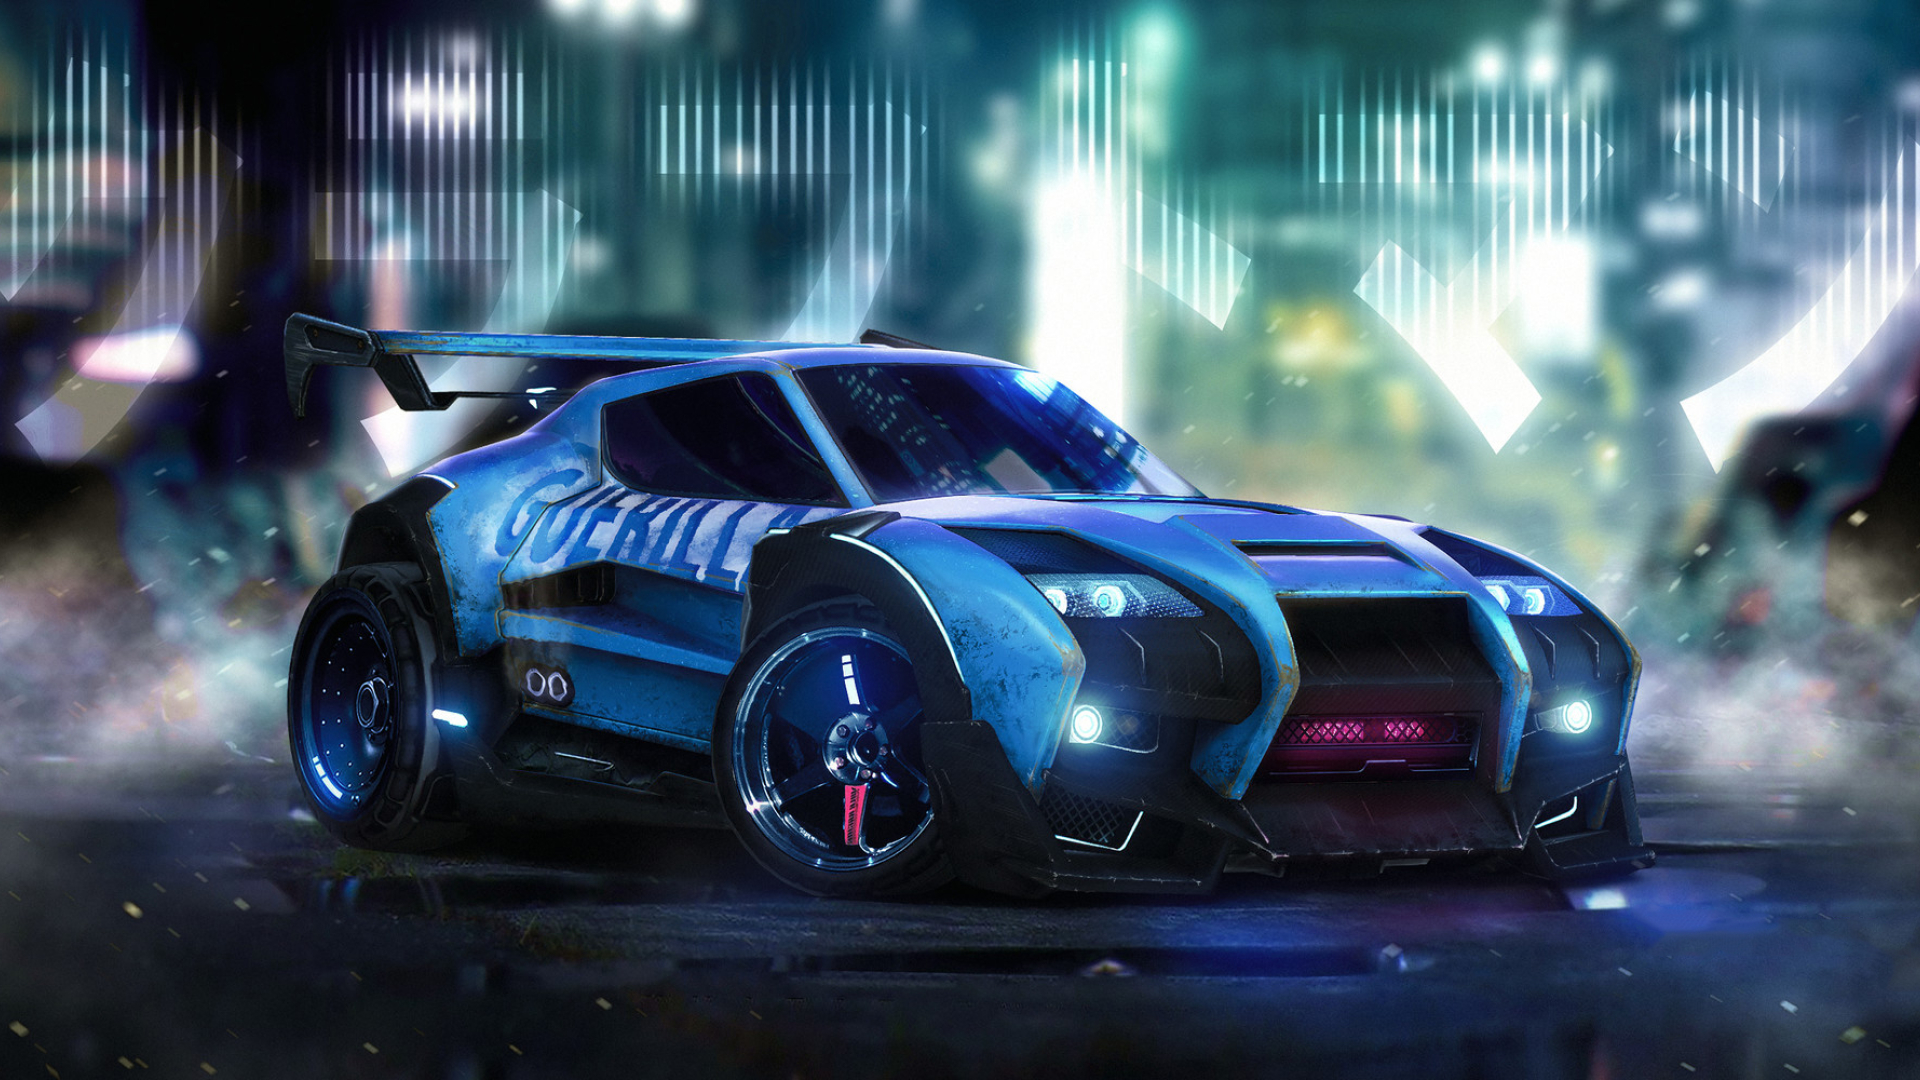 1920x1080 Rocket League Car Artwork 1080p Laptop Full Hd Wallpaper Hd Cars 4k Wallpapers Images Photos And Background Wallpapers Den